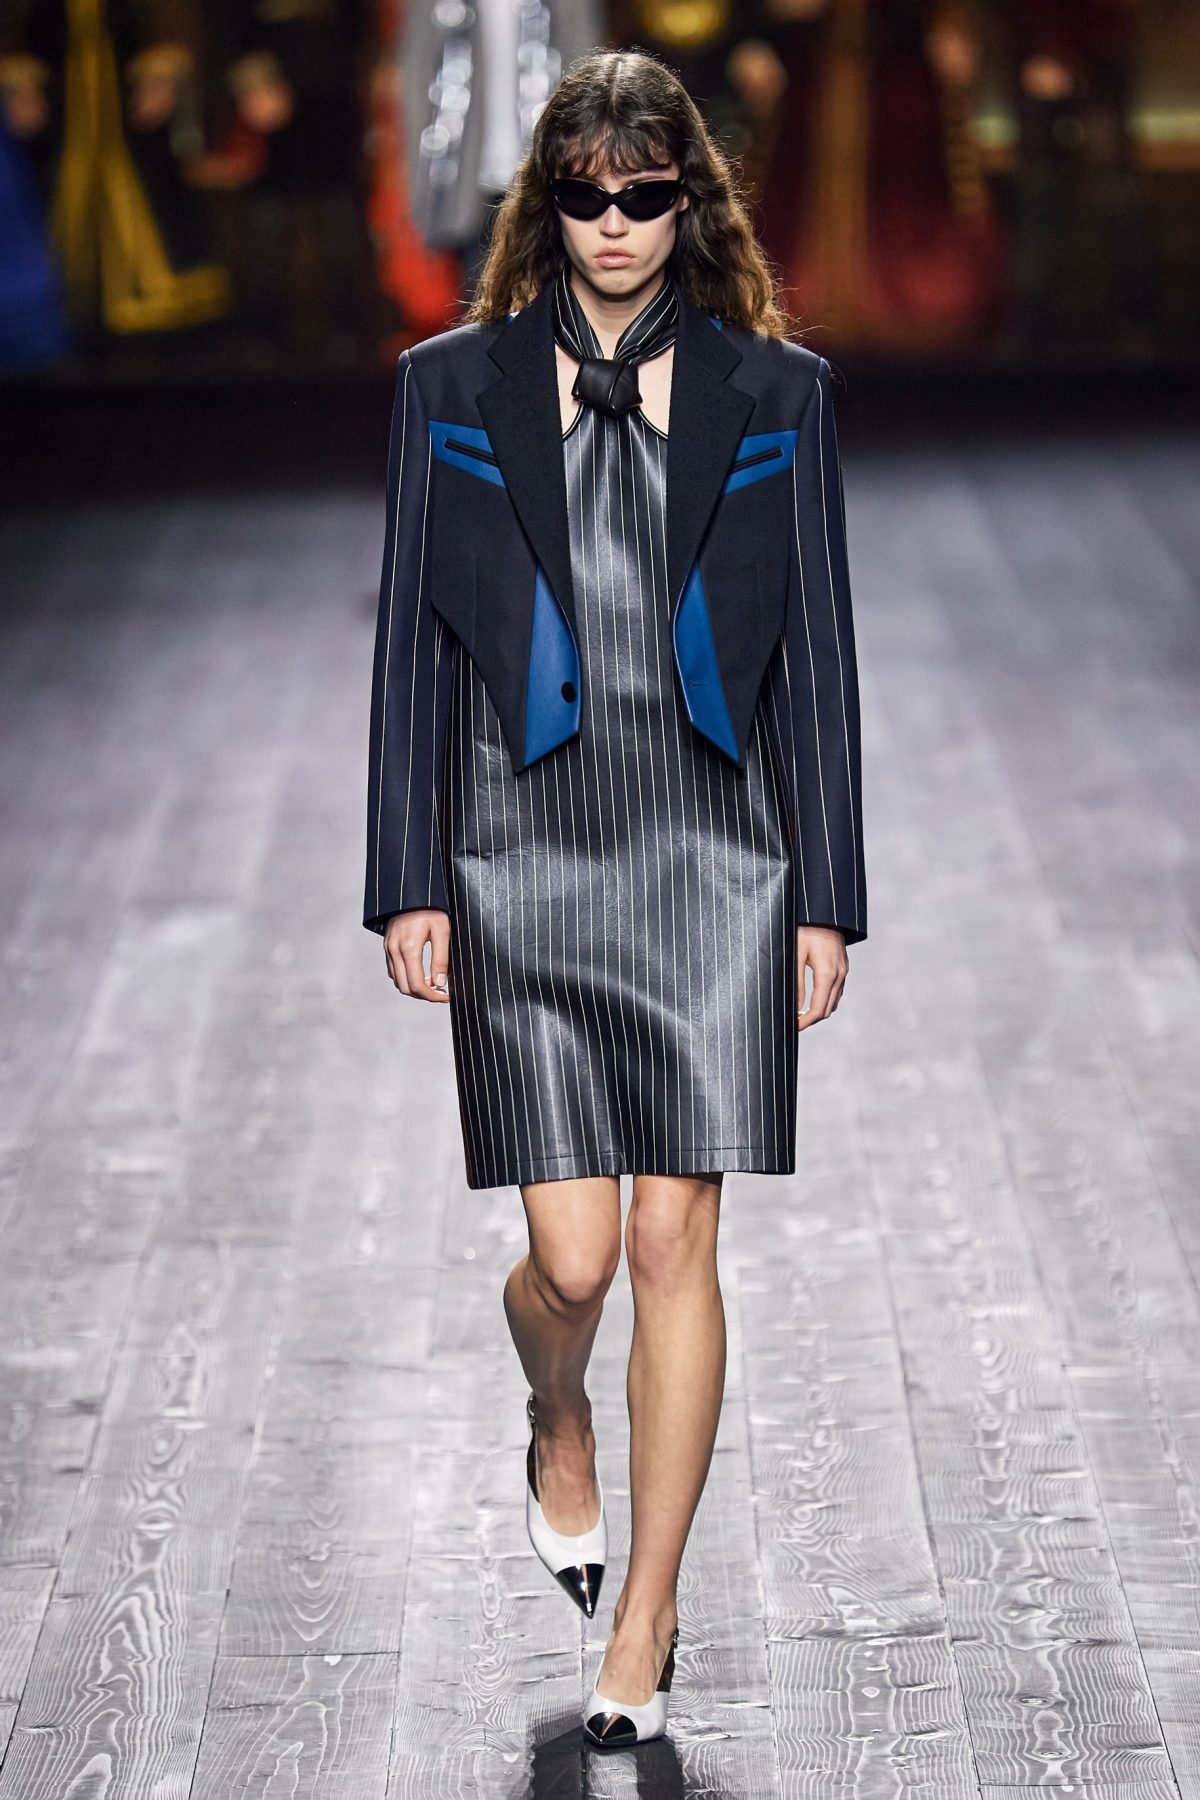 Louis Vuitton AW15 runway show Rome Italy, leather pencil skirt with fur  jacket - Meagan's Moda